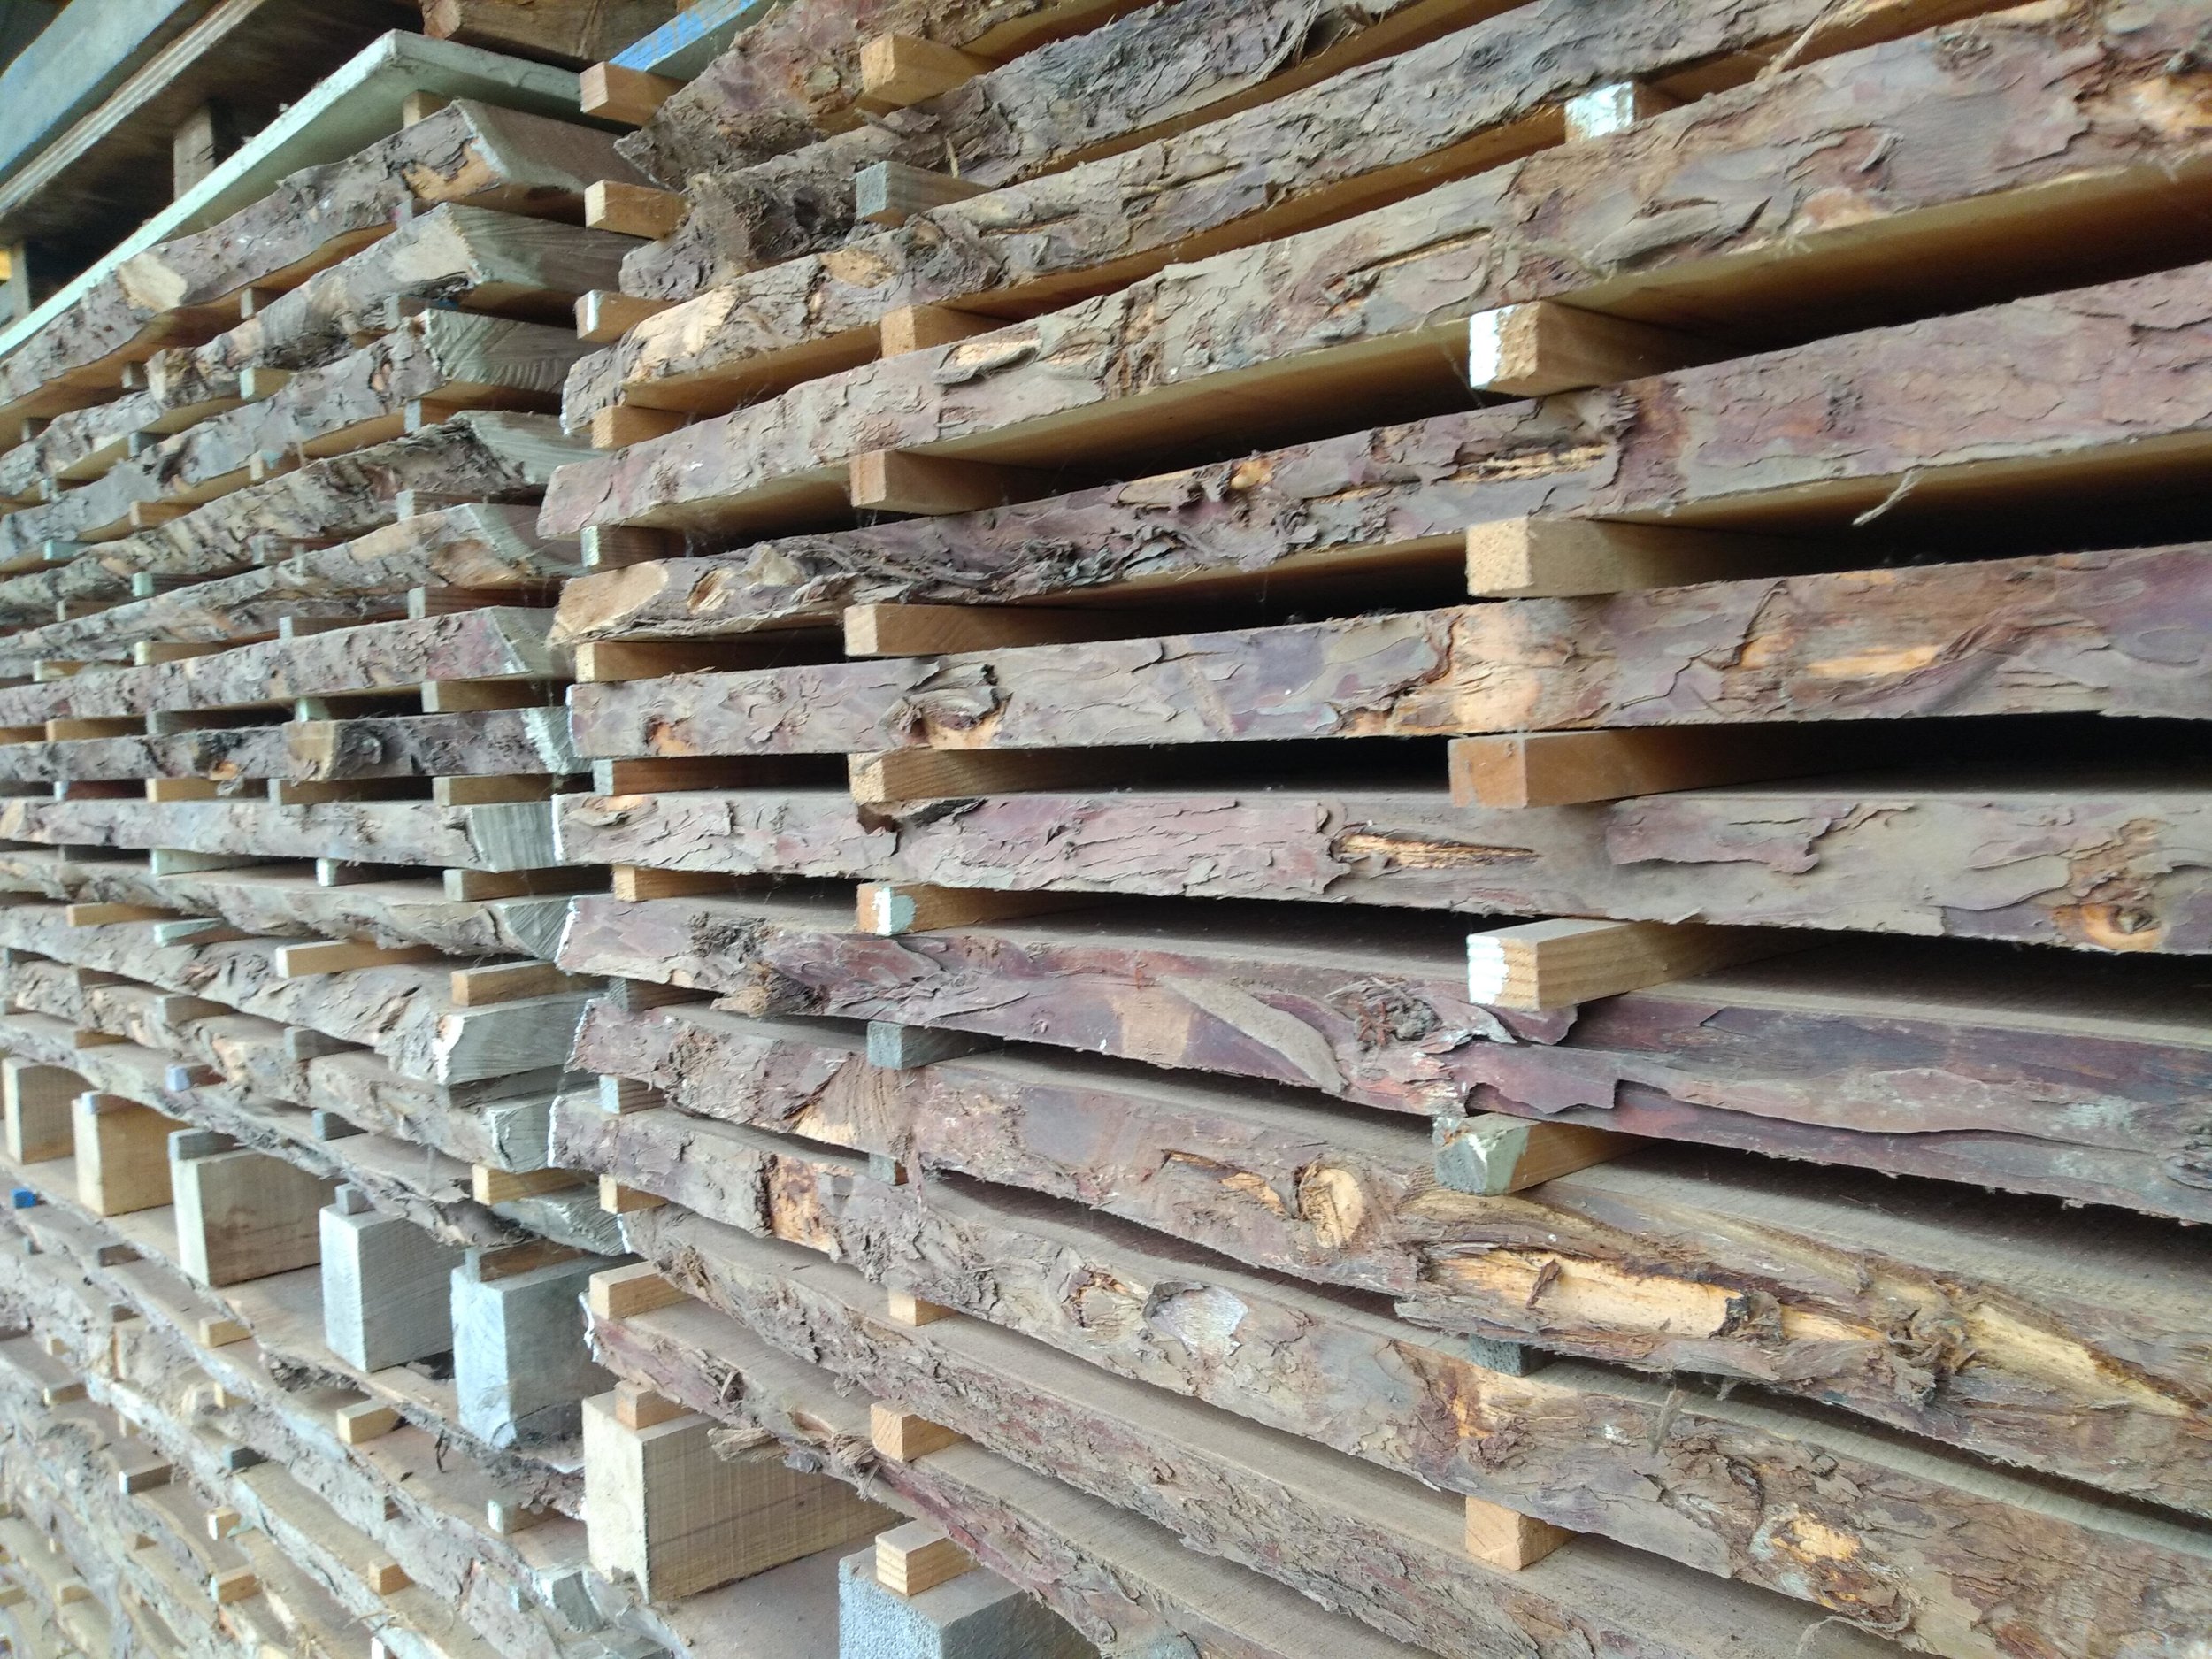 Timber stacked for selection for custom hand crafted bespoke furniture design